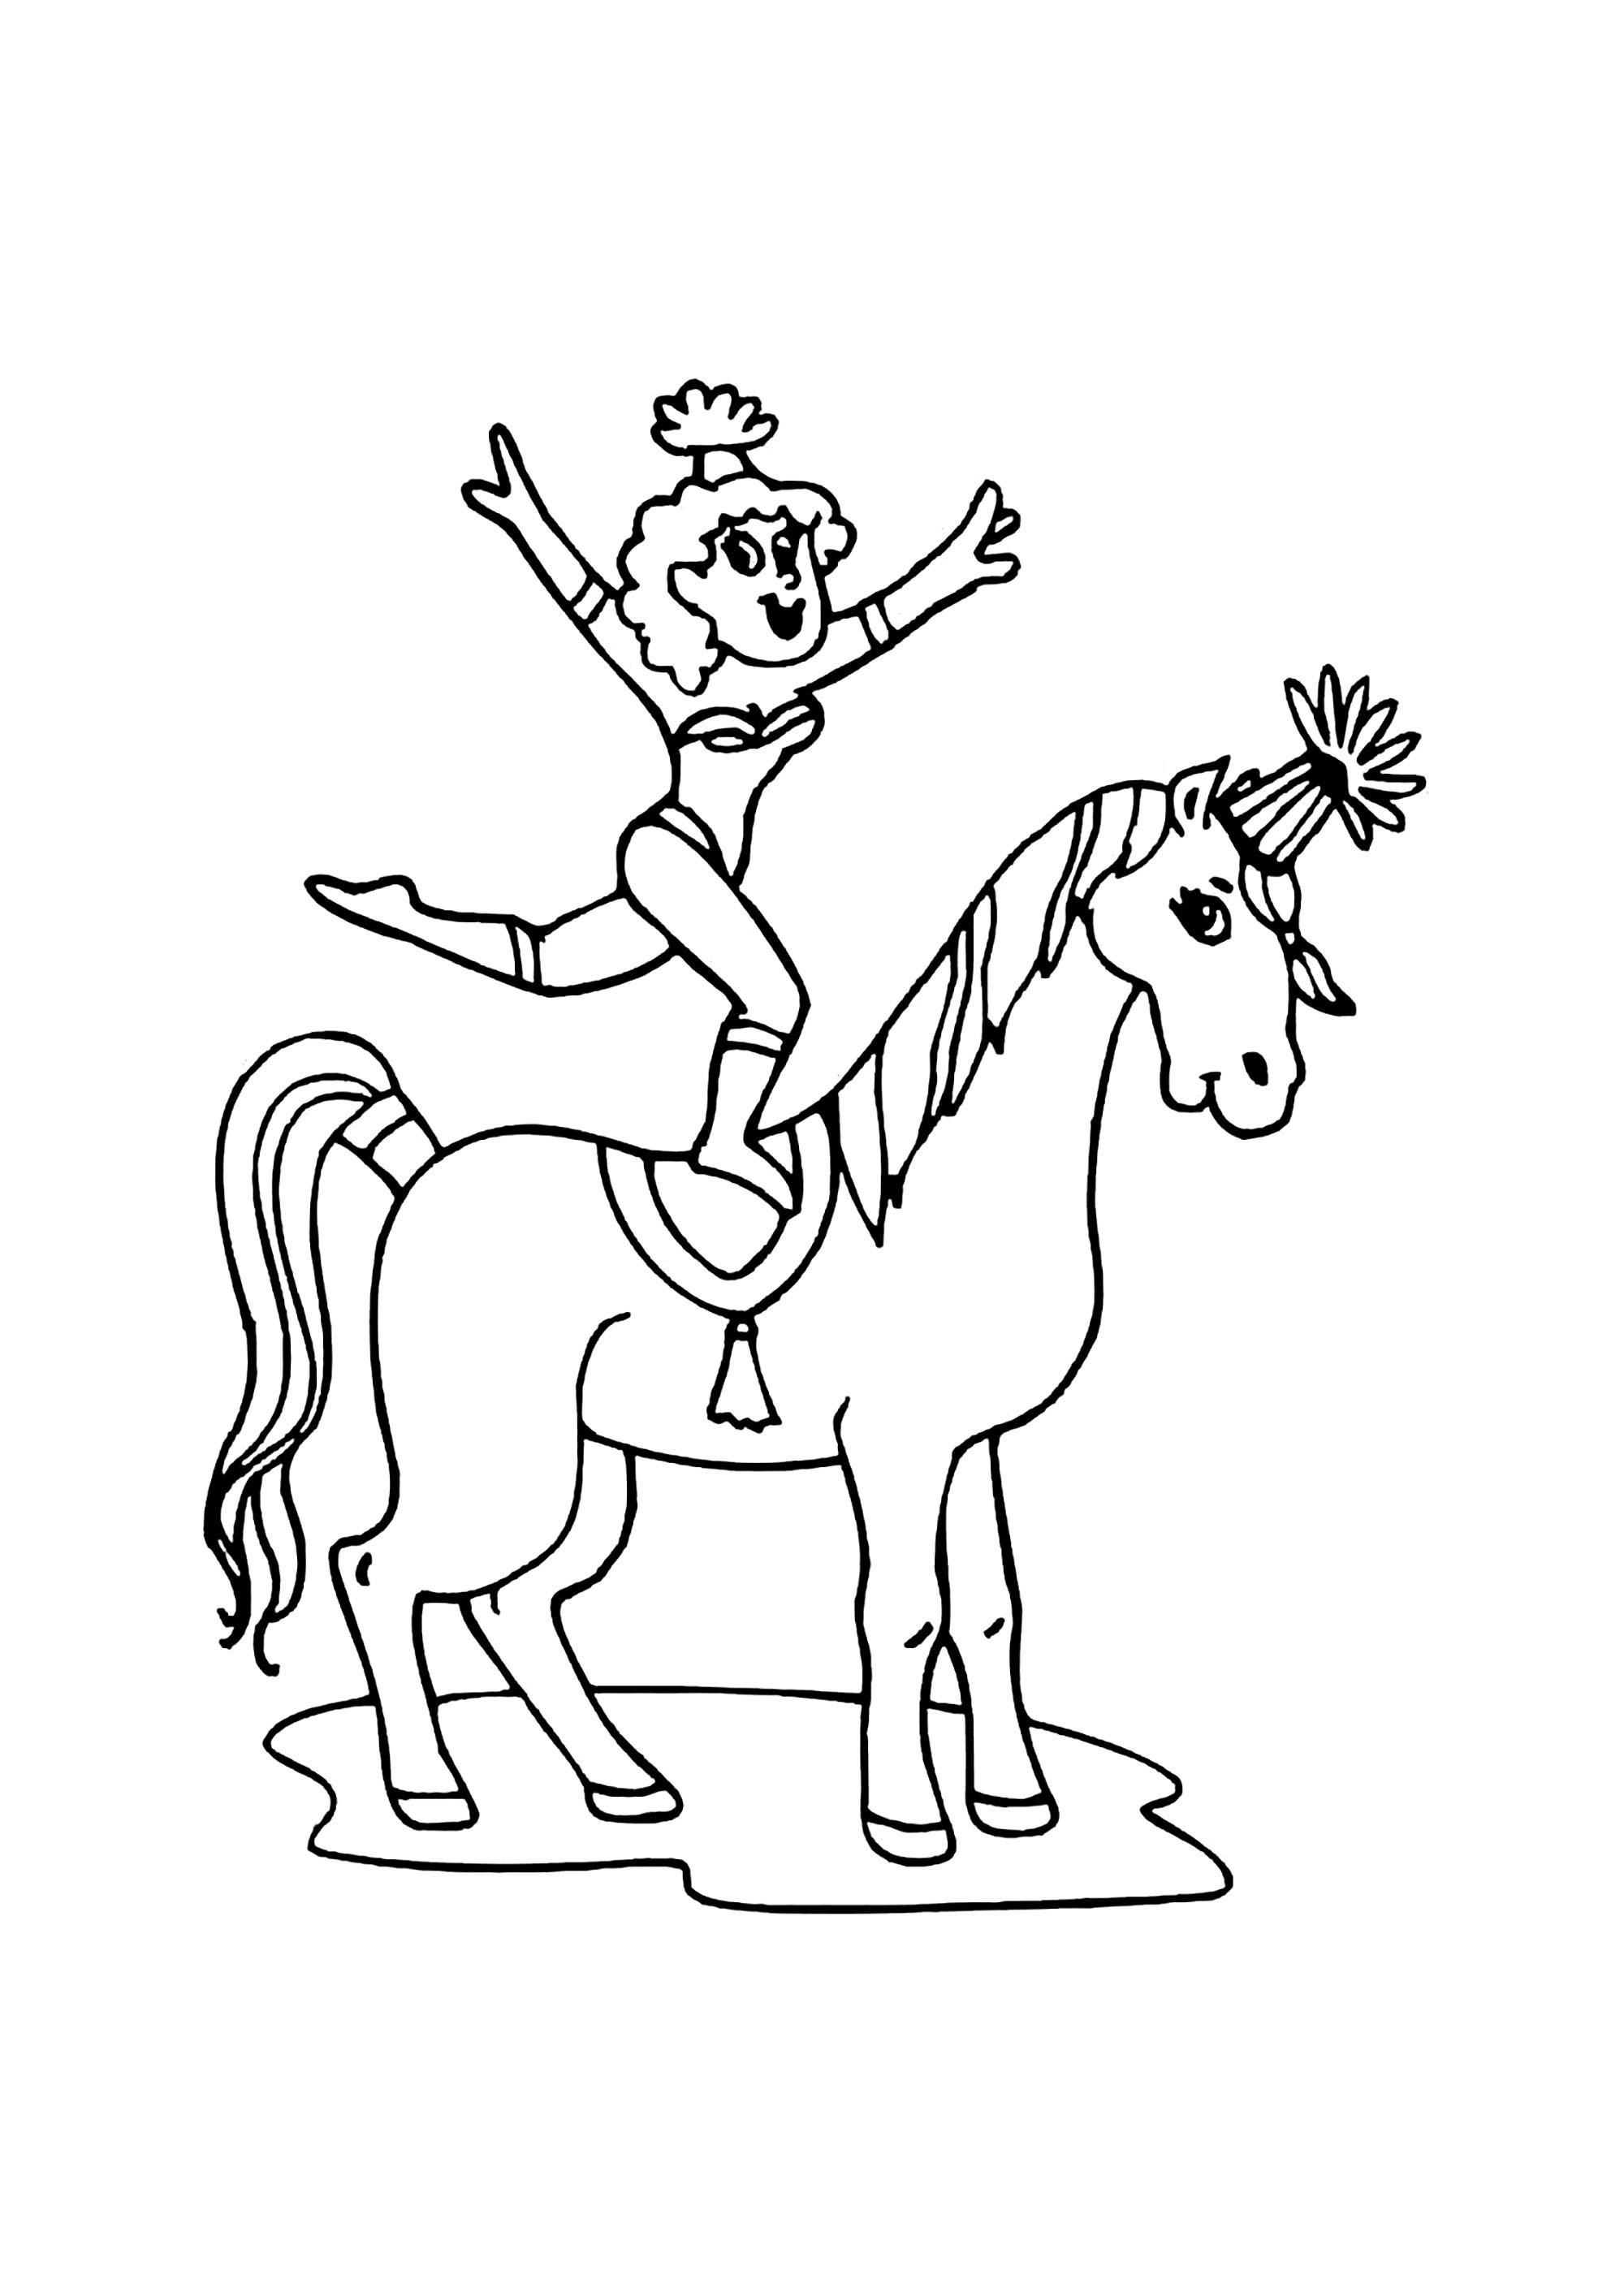 Coloriage Cirque - Circus Kids Coloring Pages